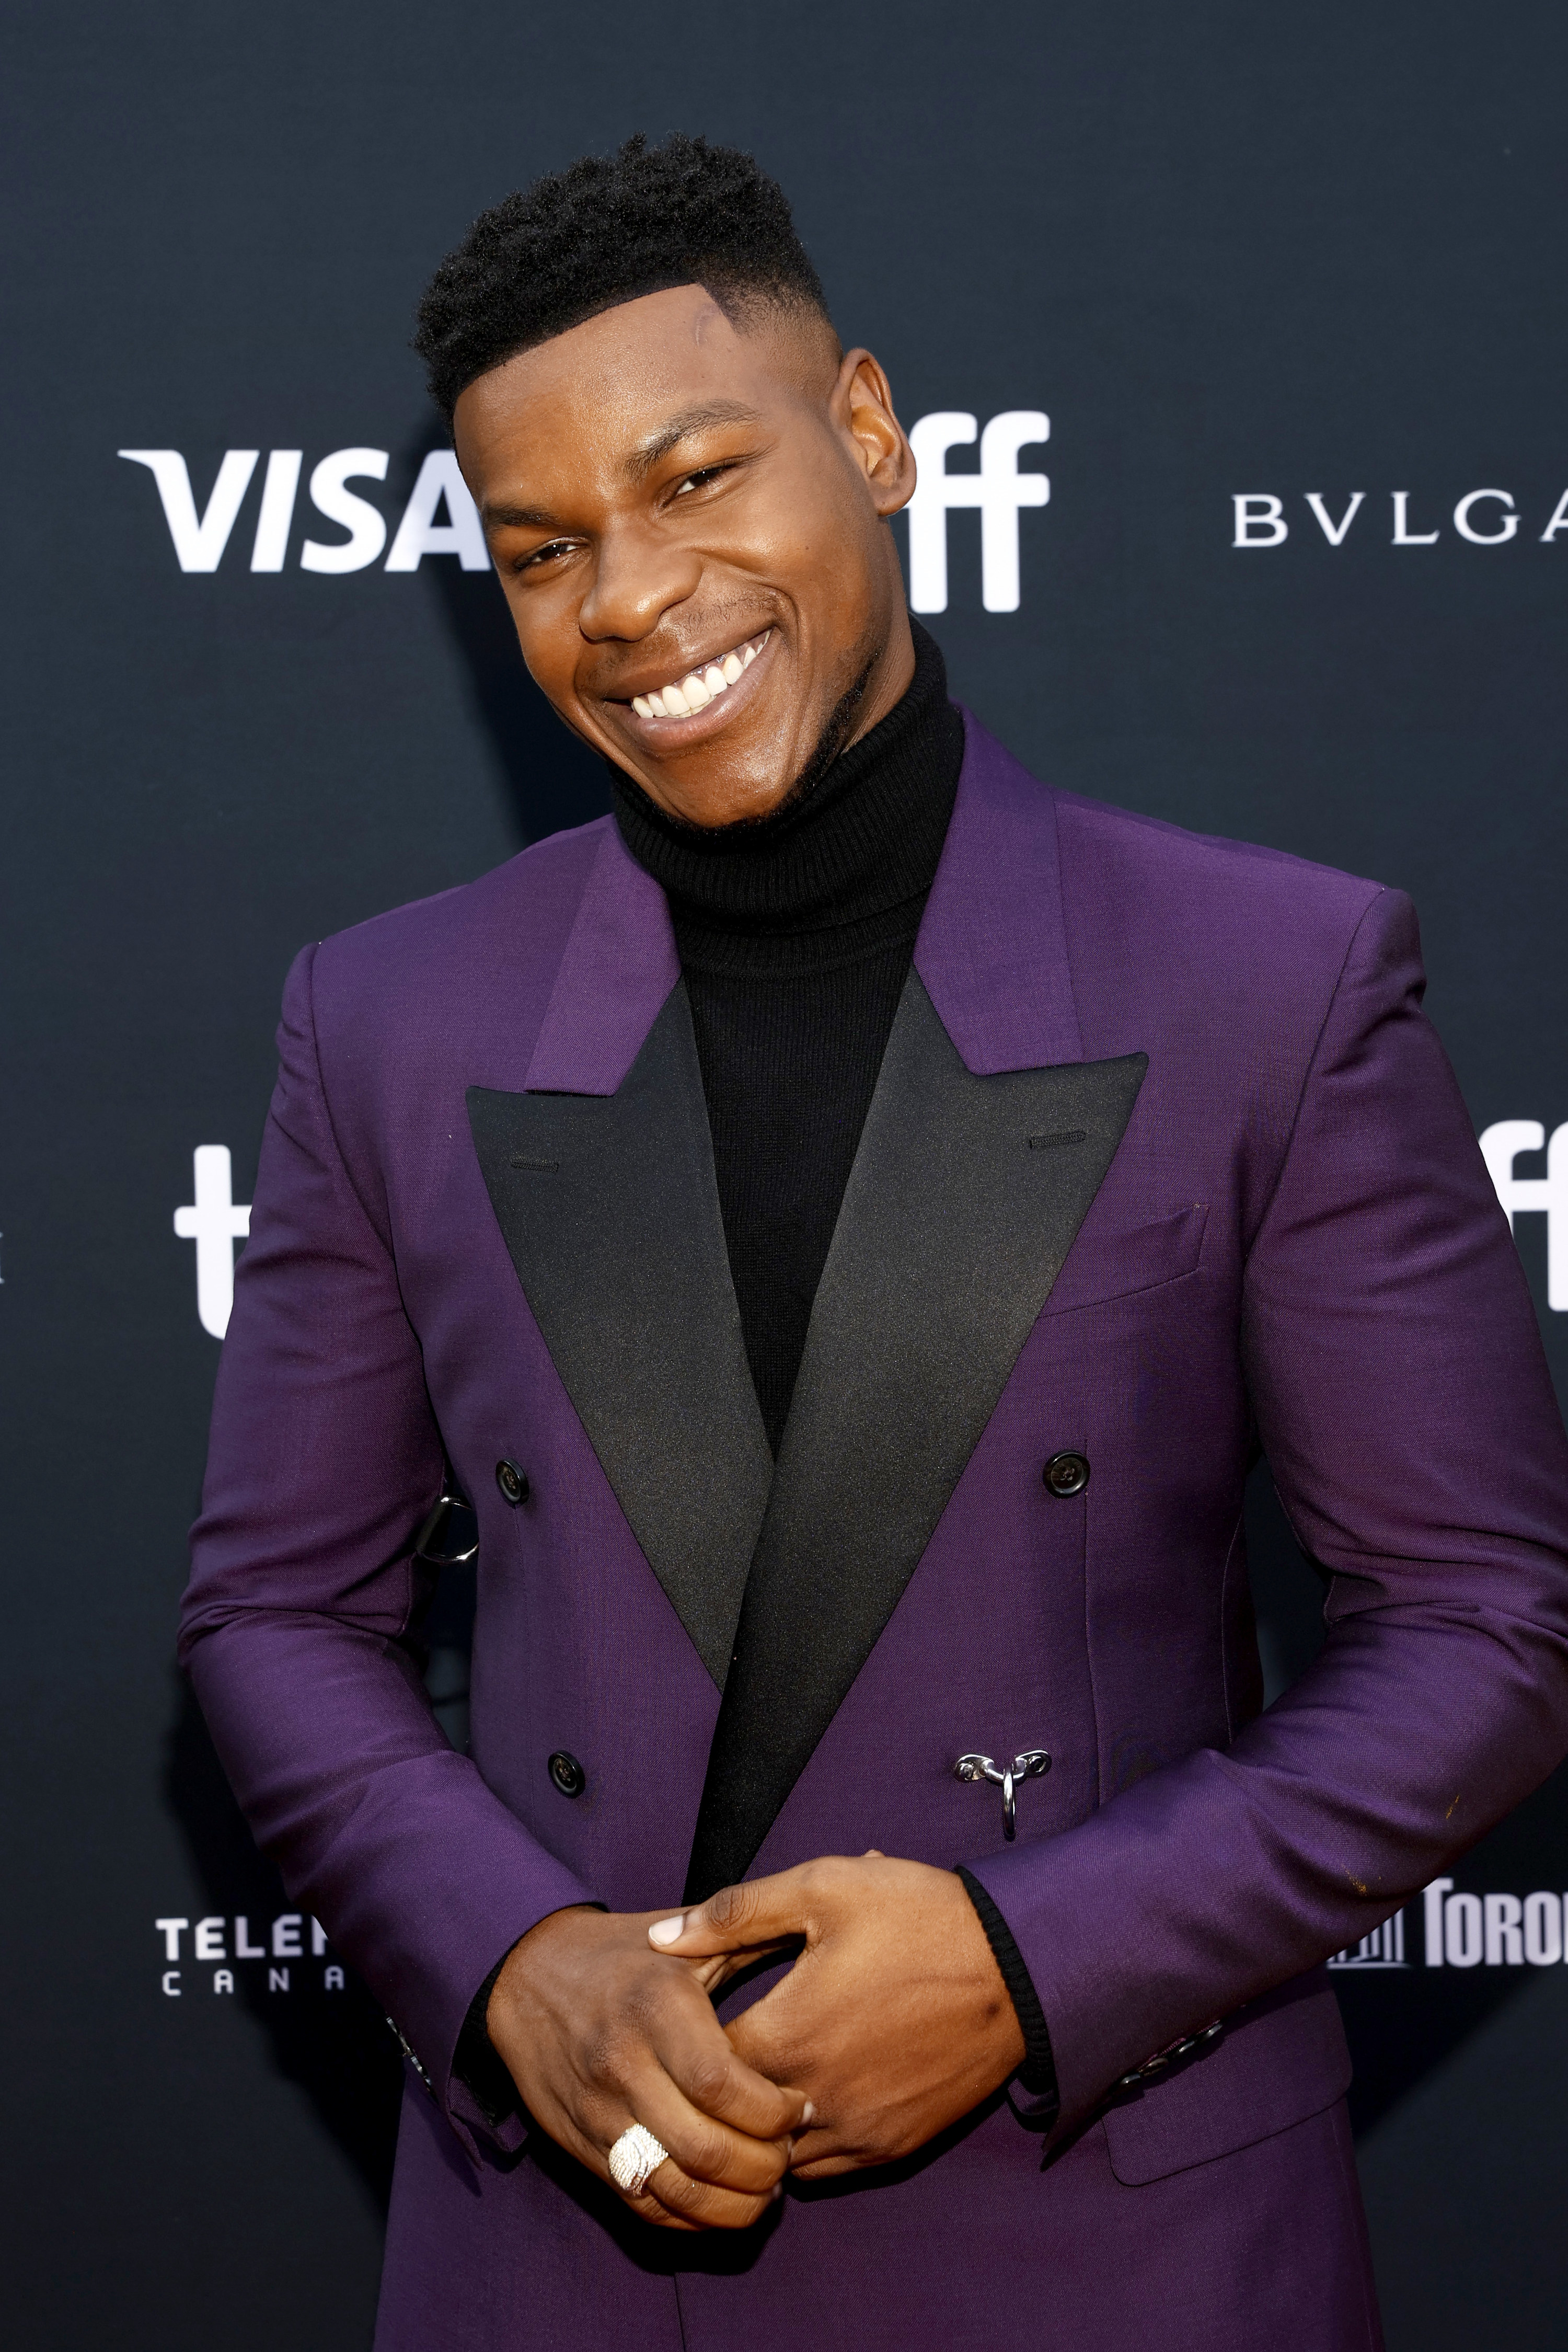 John smiling broadly, his hands clasped together at his waist; he wears a purple suit with black lapels and a black turtleneck underneath, with a chunky silver ring on one finger